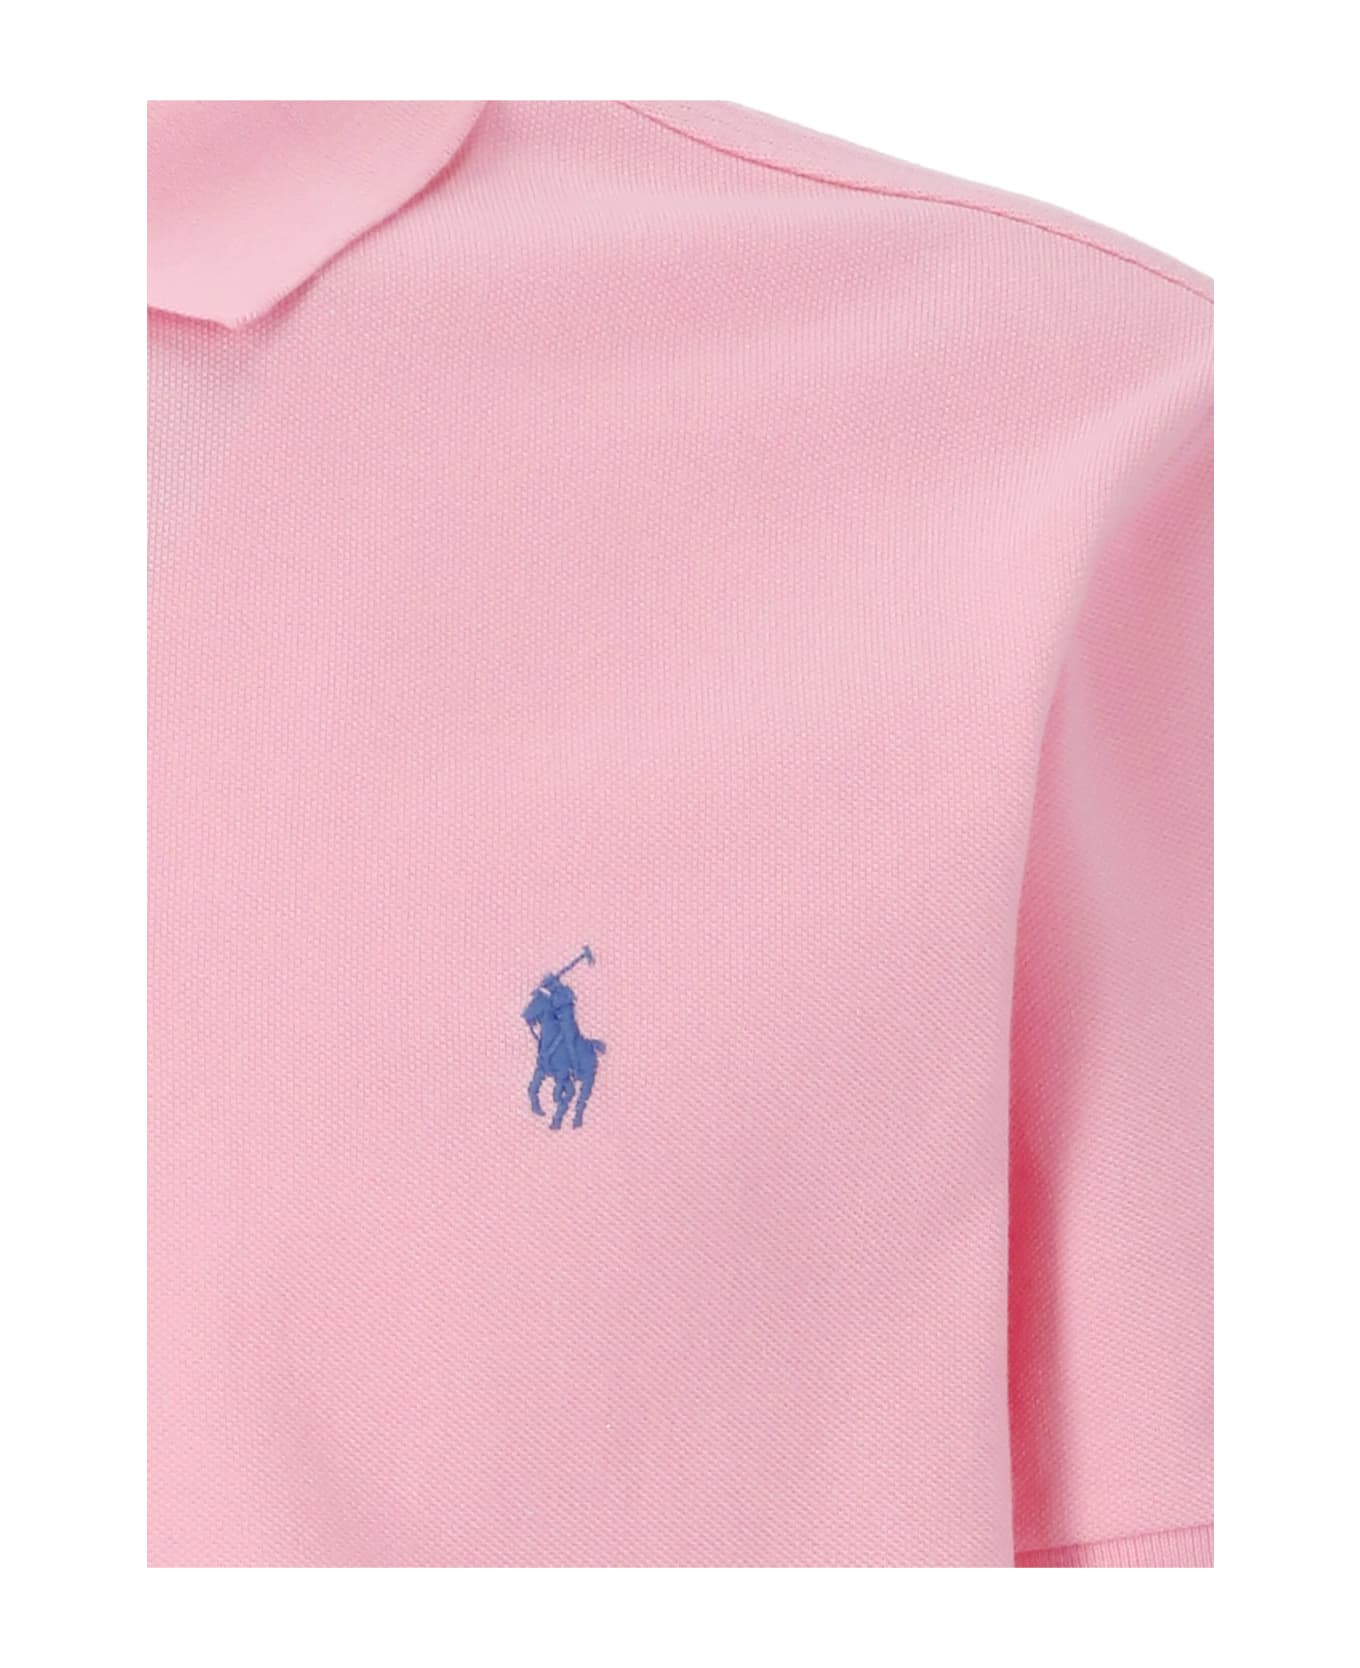 Ralph Lauren Polo Shirt With Pony - Pink